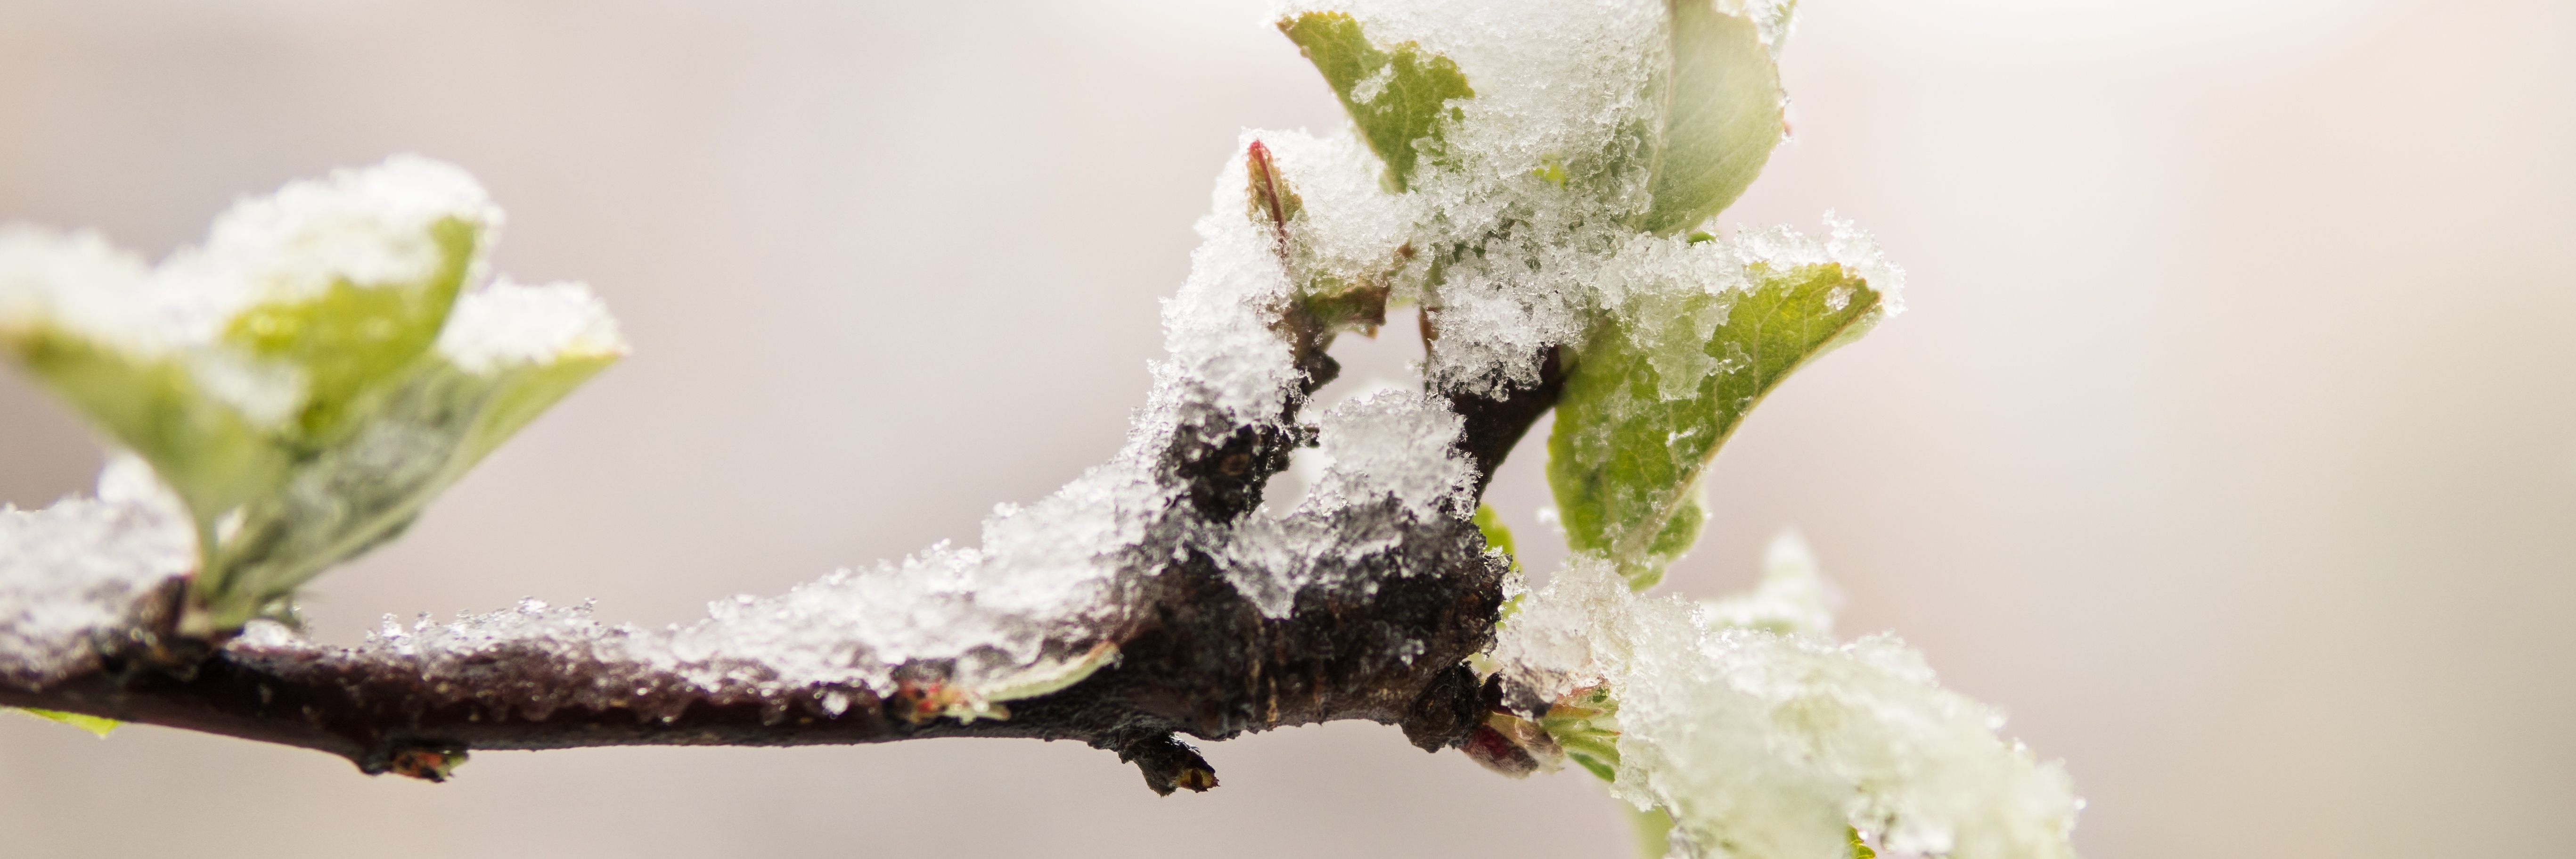 Spring frost losses and climate change – Not a contradiction in terms